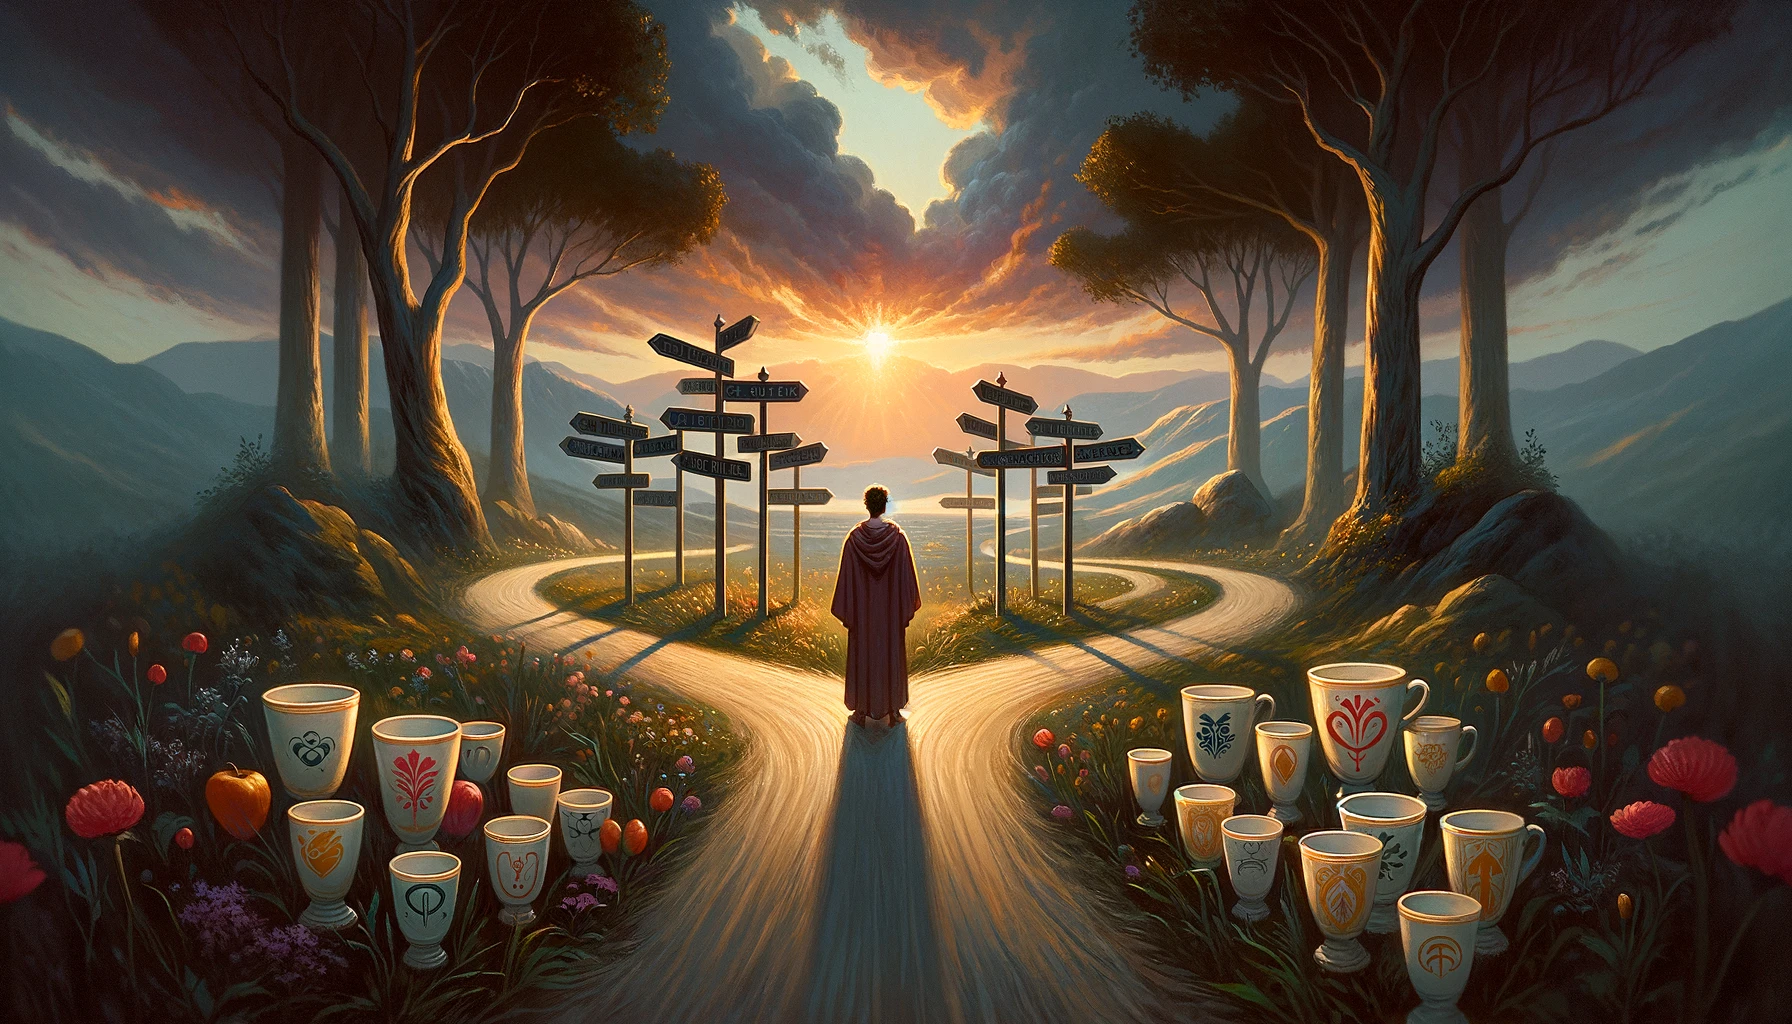 "Illustration portraying a significant crossroads moment, symbolizing the journey towards self-discovery and the quest for deeper fulfillment beyond known comforts and relationships."